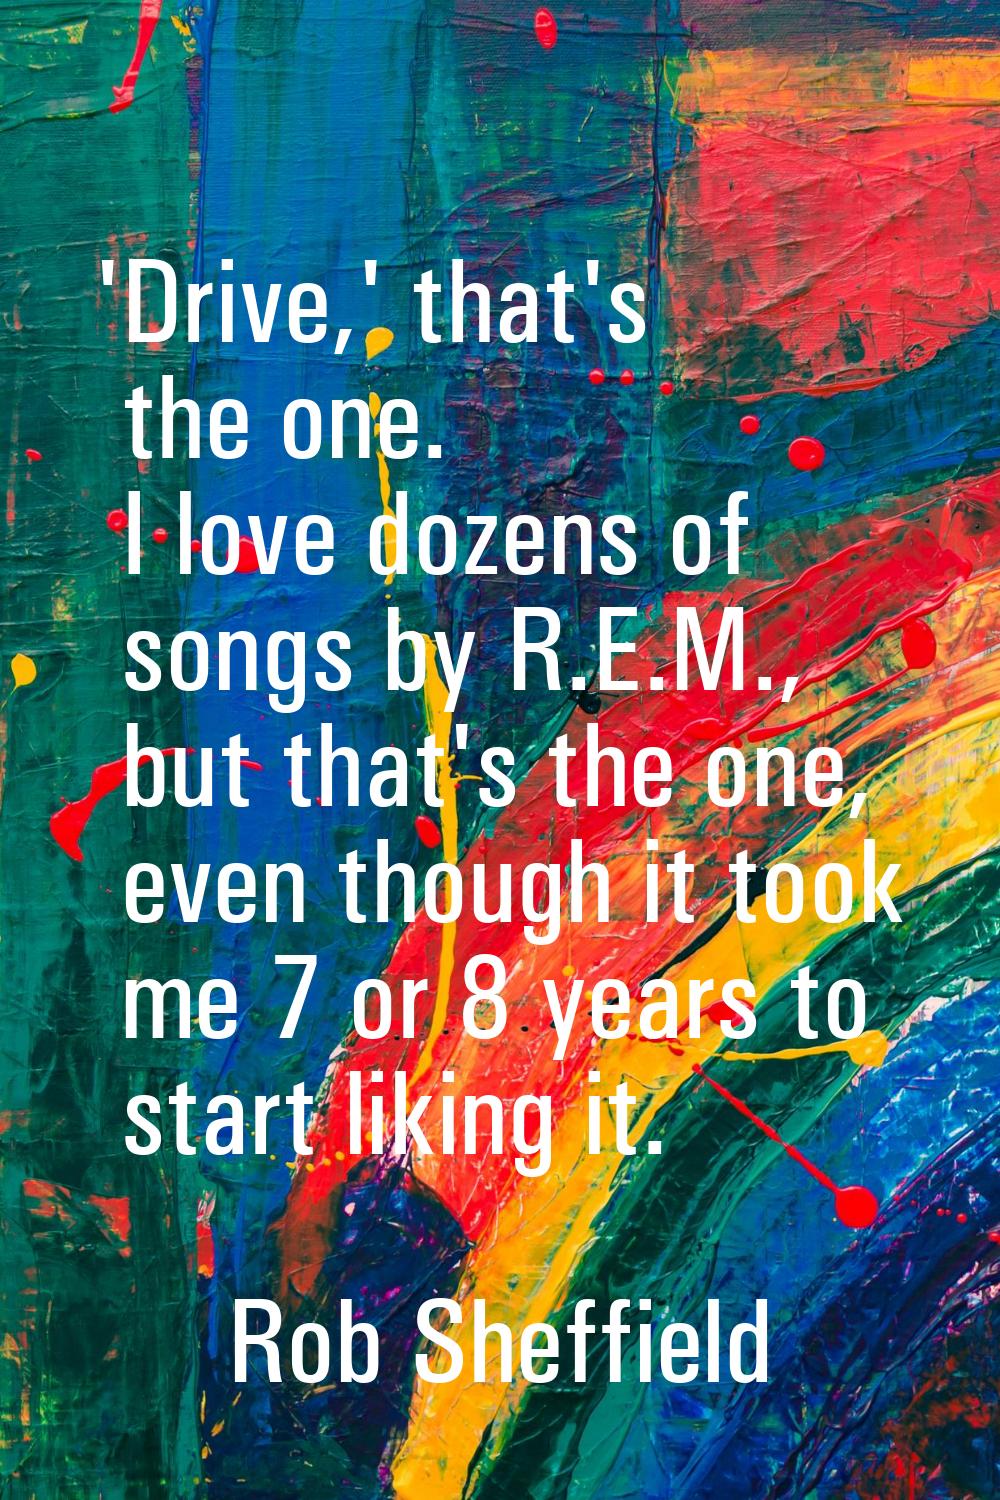 'Drive,' that's the one. I love dozens of songs by R.E.M., but that's the one, even though it took 